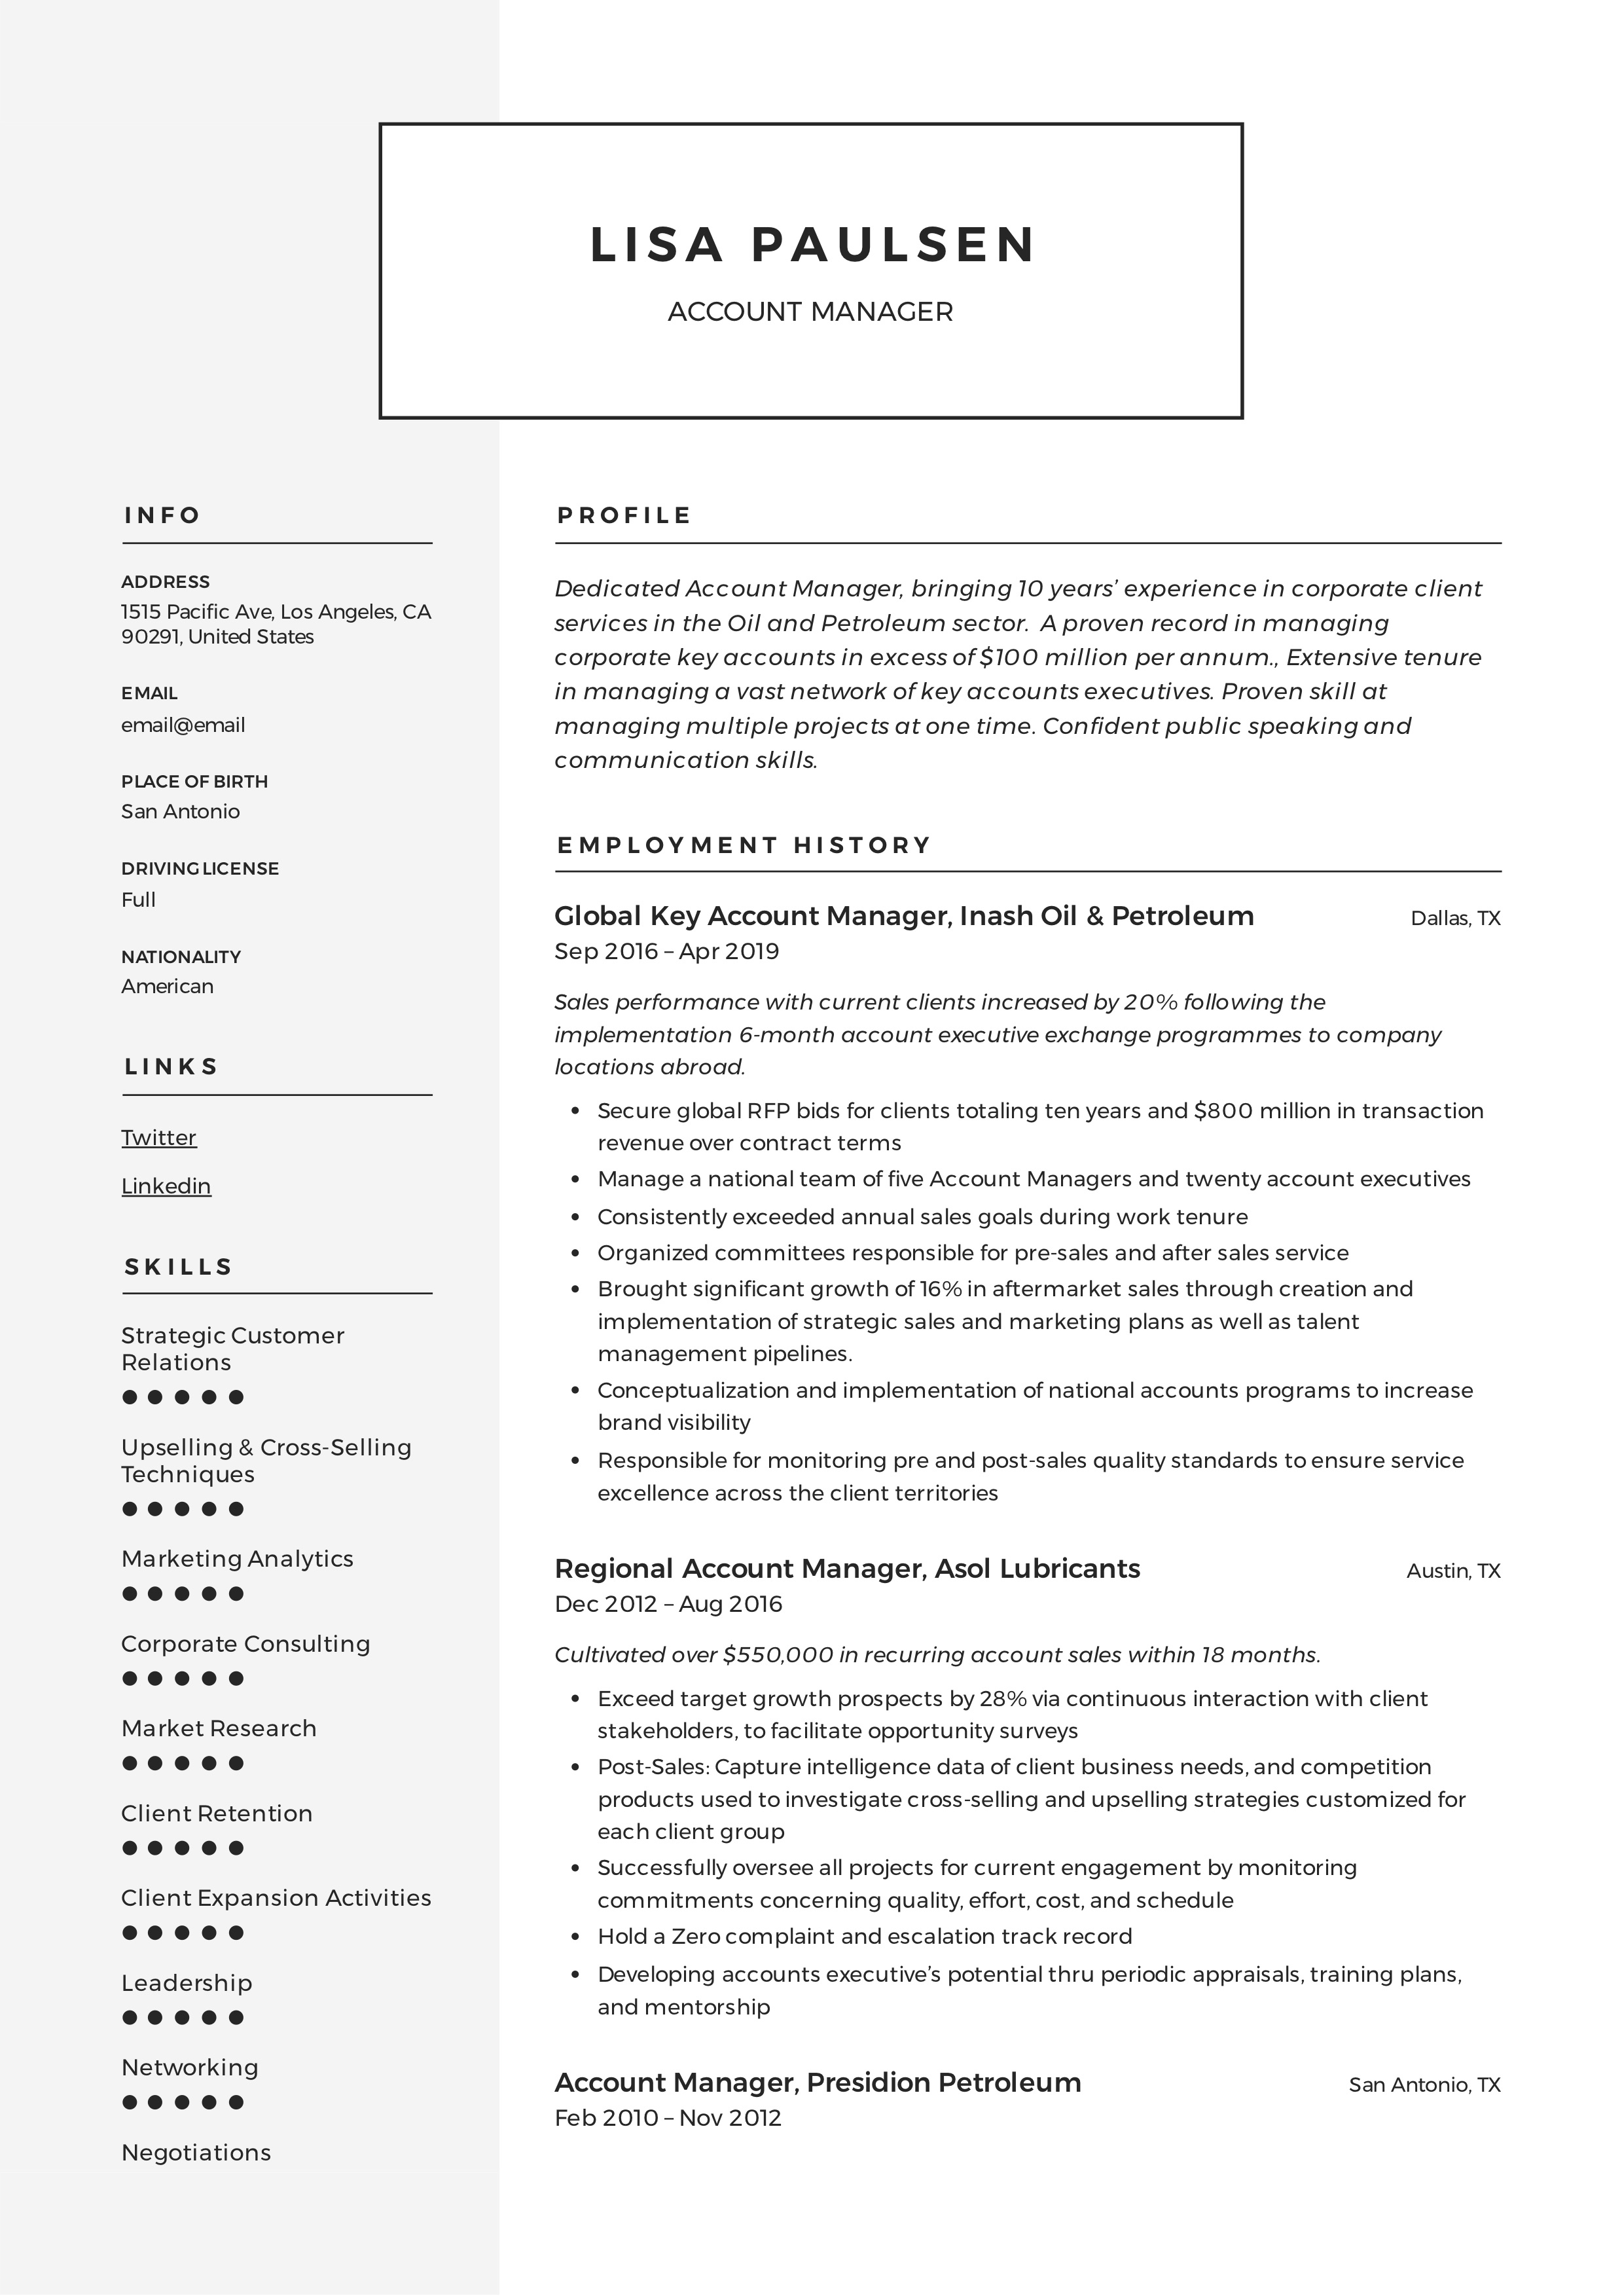 Account manager modern resume example